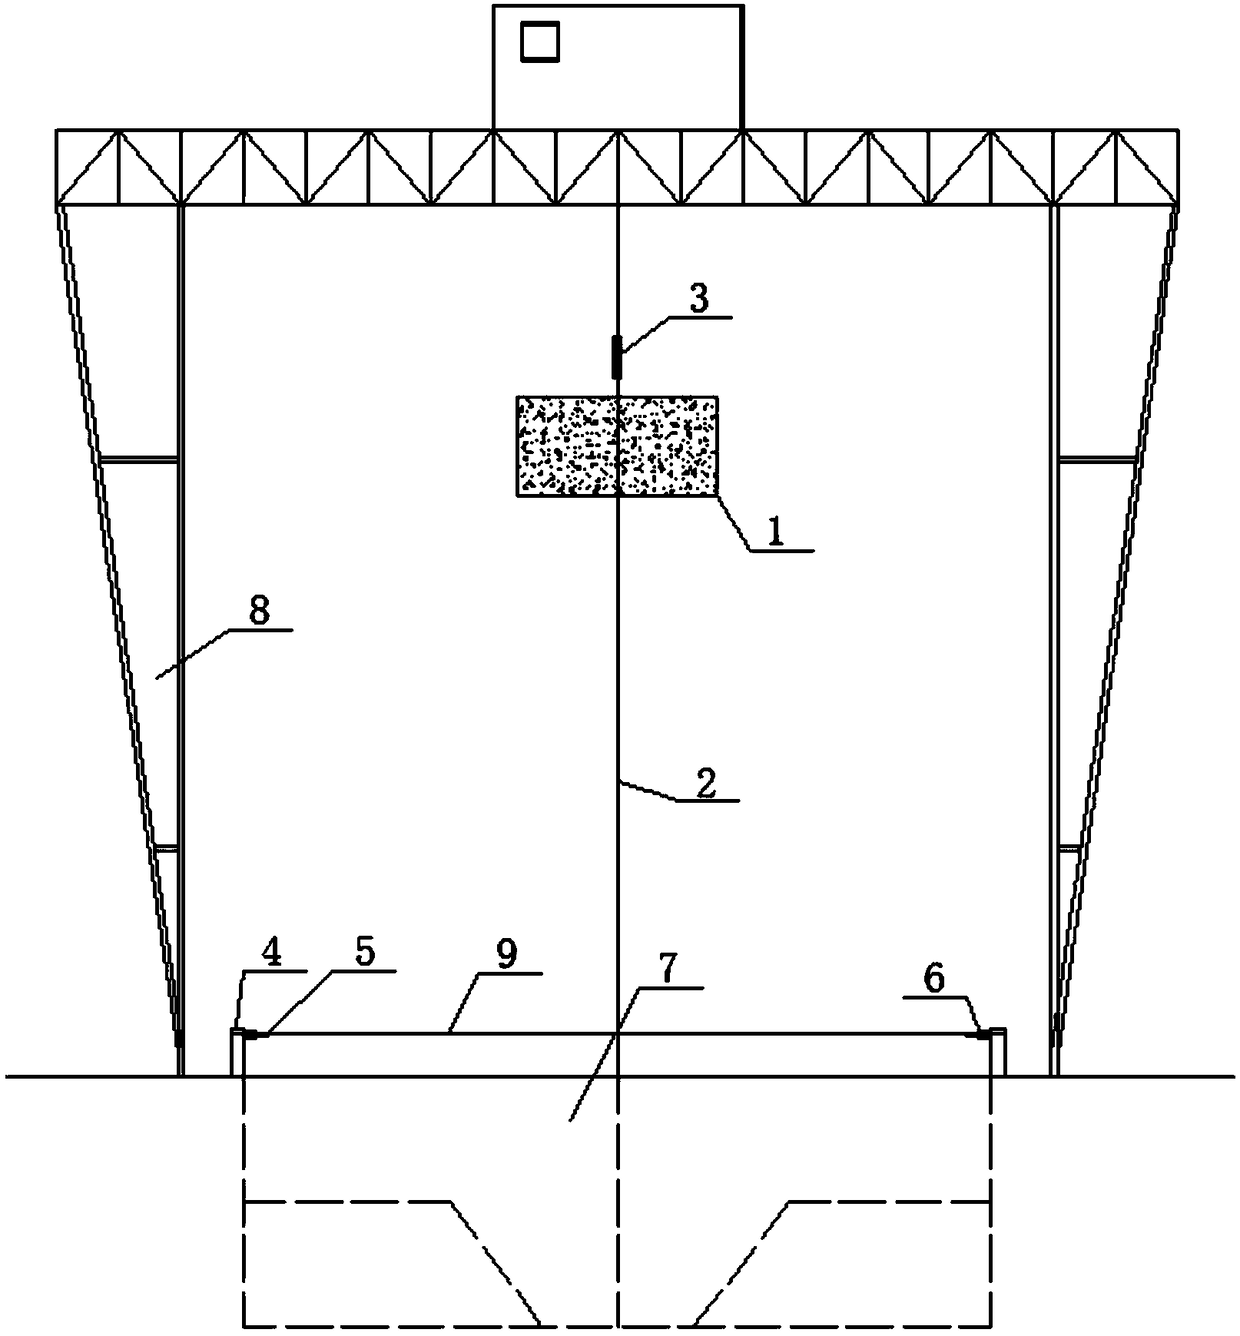 Rope type guided directional impact device for dynamic test of energy dissipater of rock fall protection system